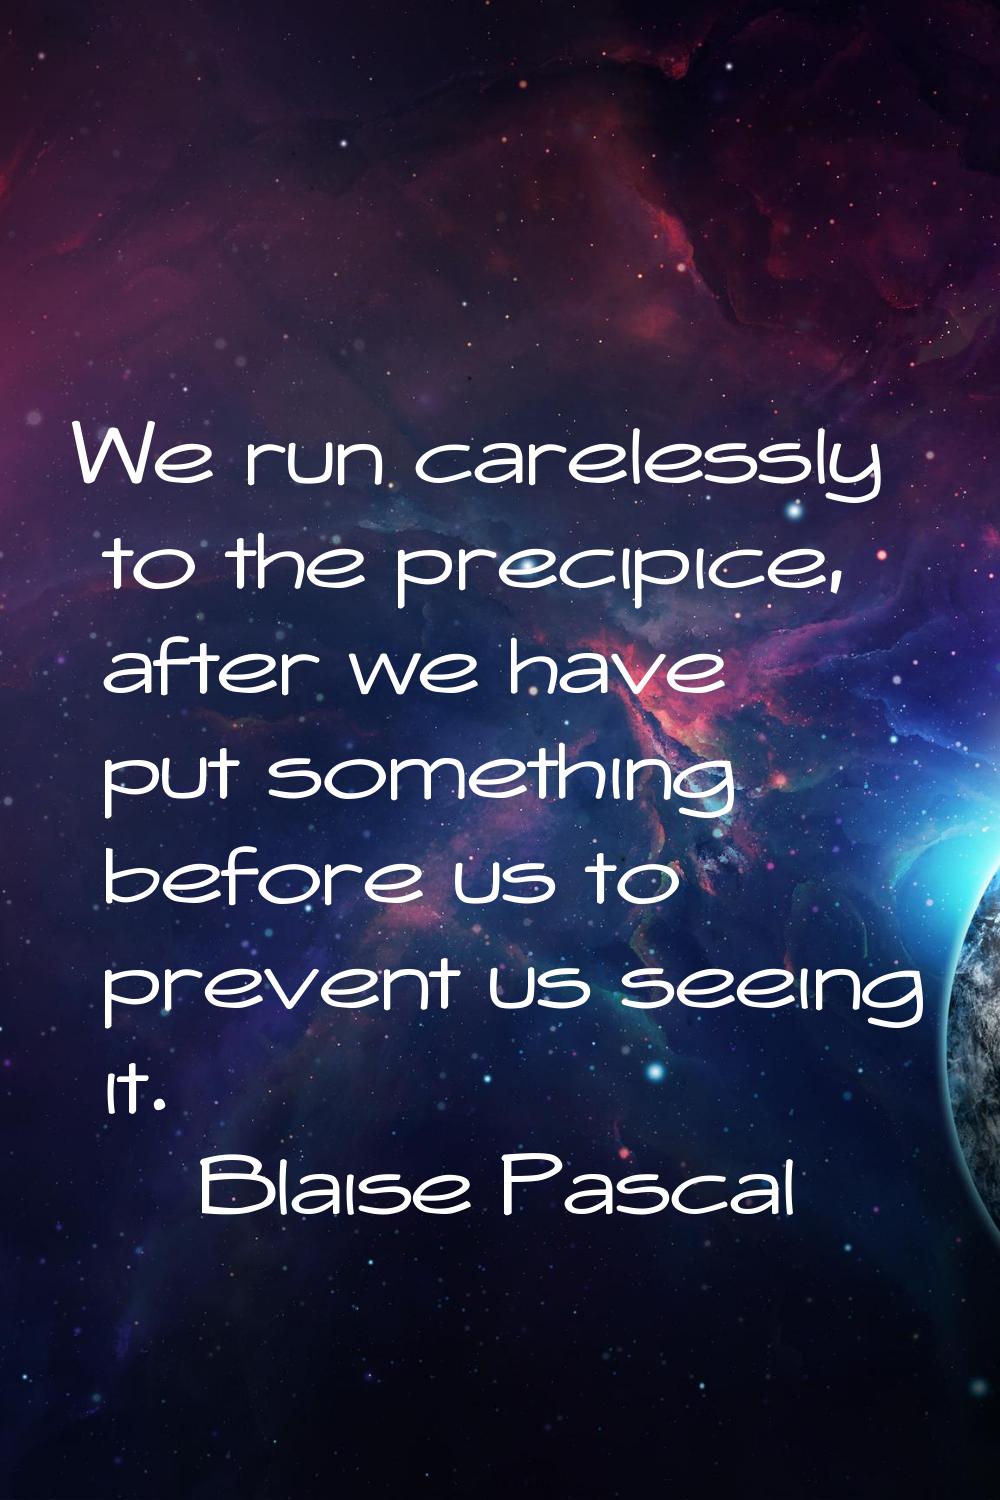 We run carelessly to the precipice, after we have put something before us to prevent us seeing it.